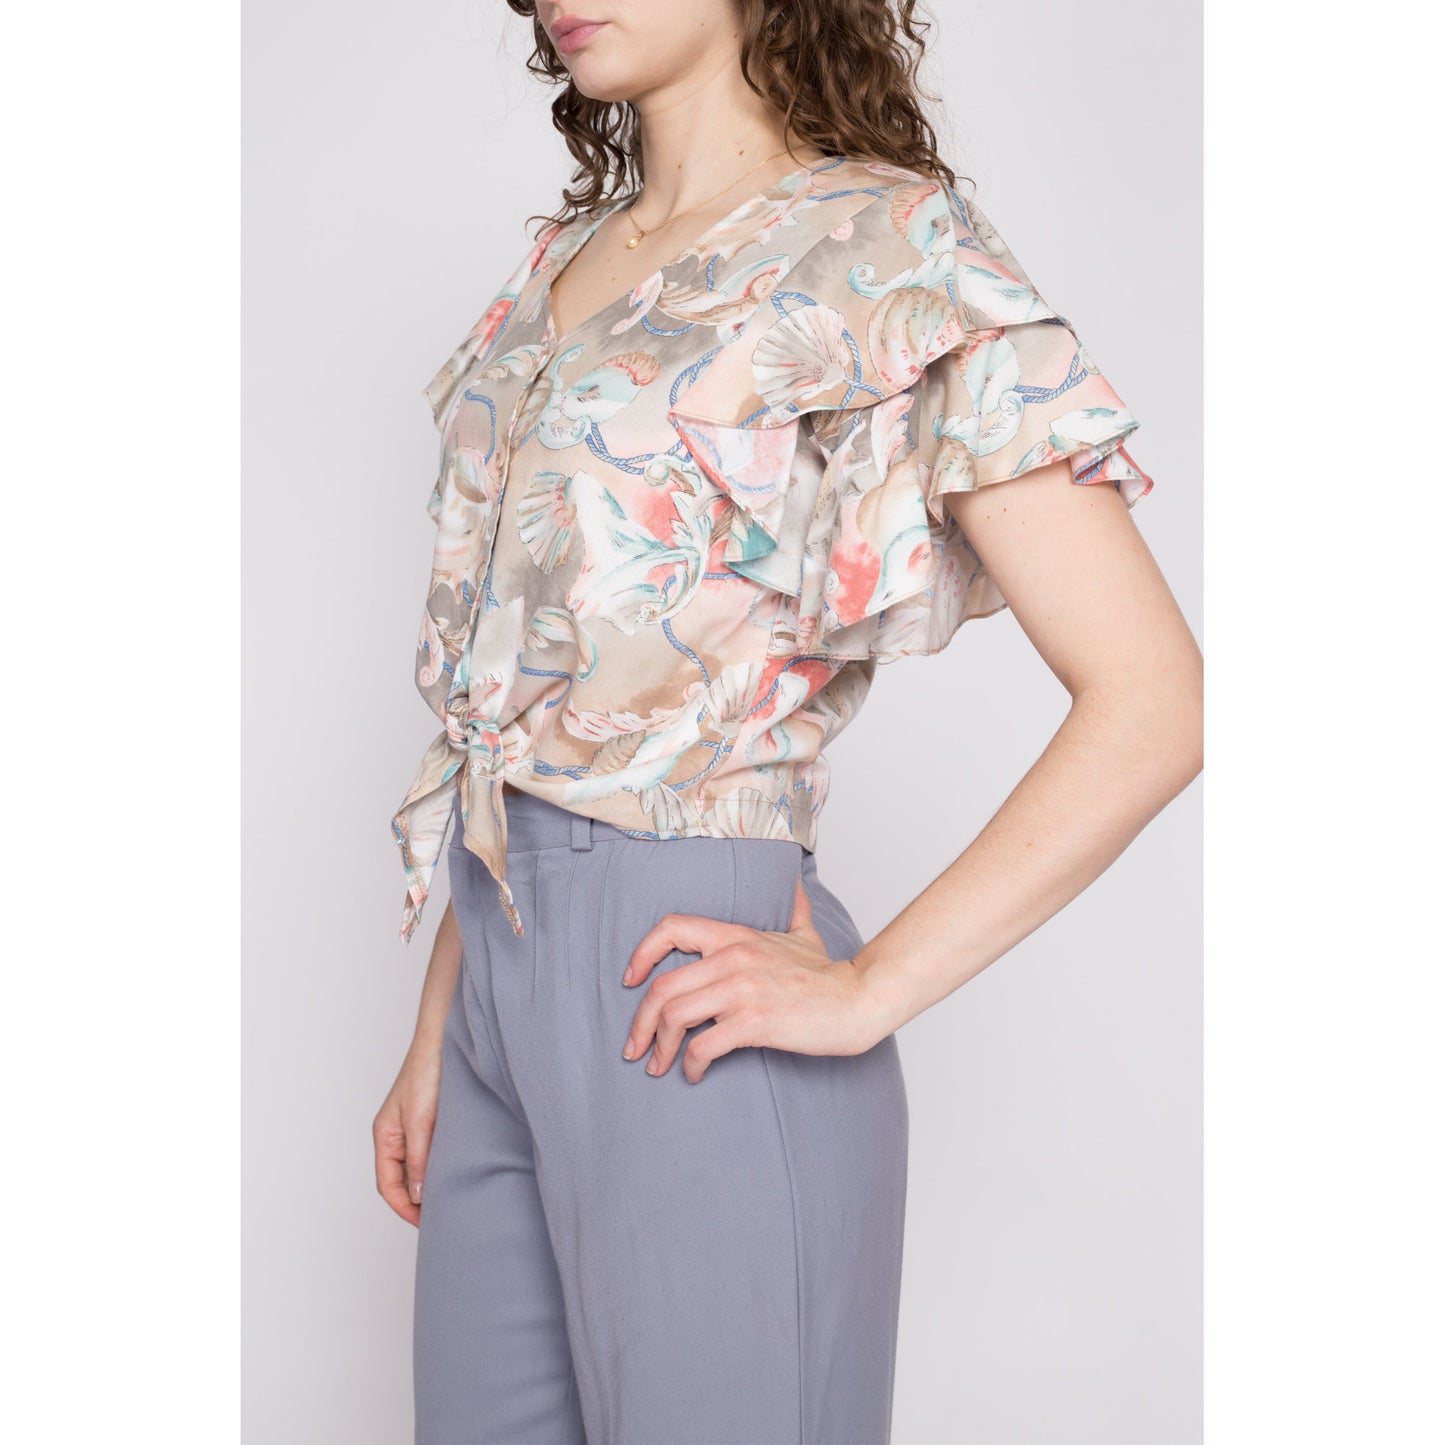 80s 90s Seashell Novelty Print Tie Front Crop Top - Small to Medium | Vintage Ruffle Puff Sleeve Button Up Cropped Shirt